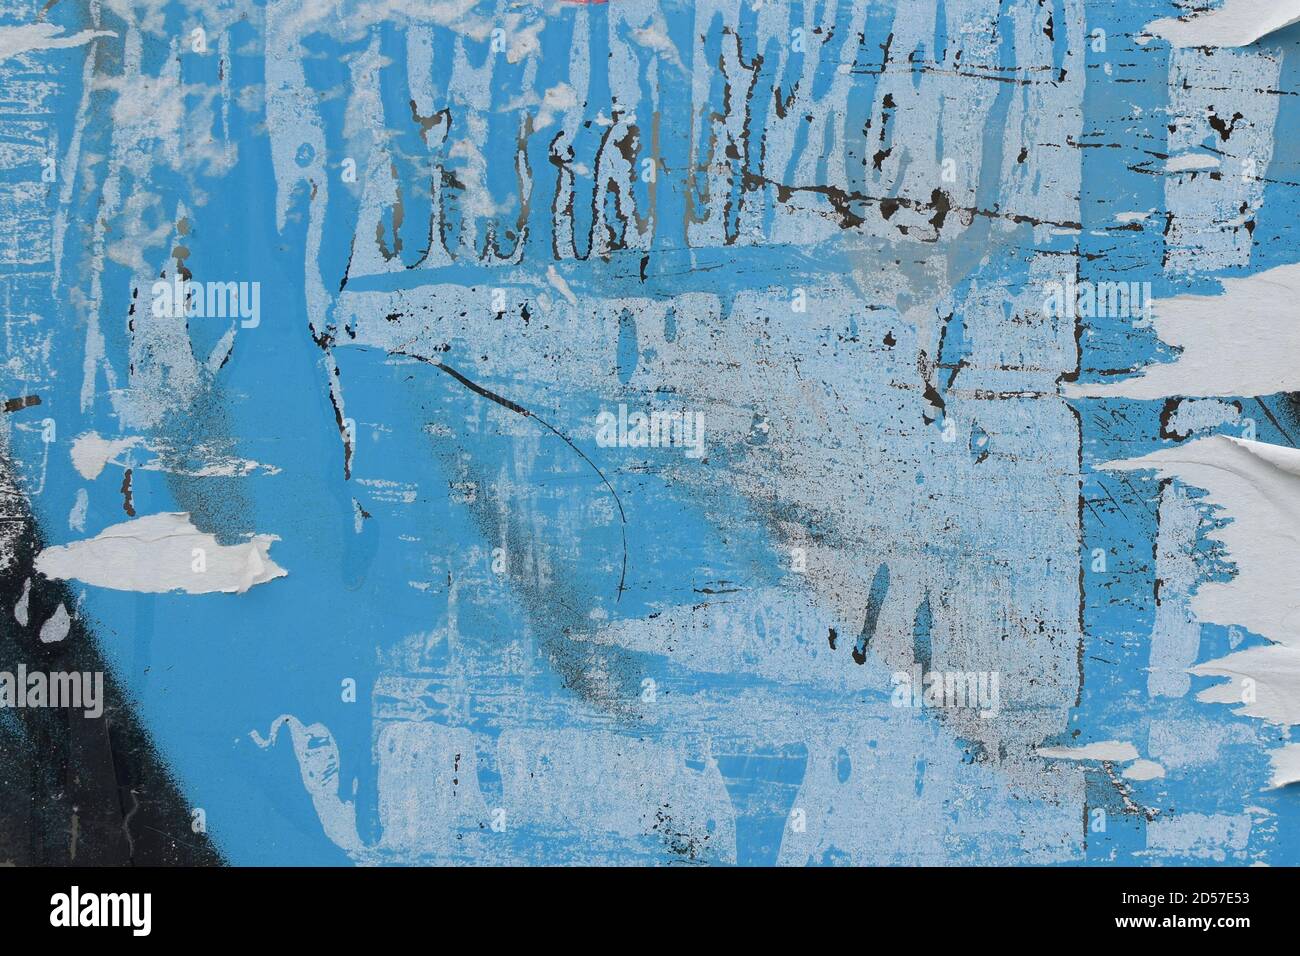 Grunge background texture with torn paper stains and scratches on glass surface. City wall abstract detail. Stock Photo